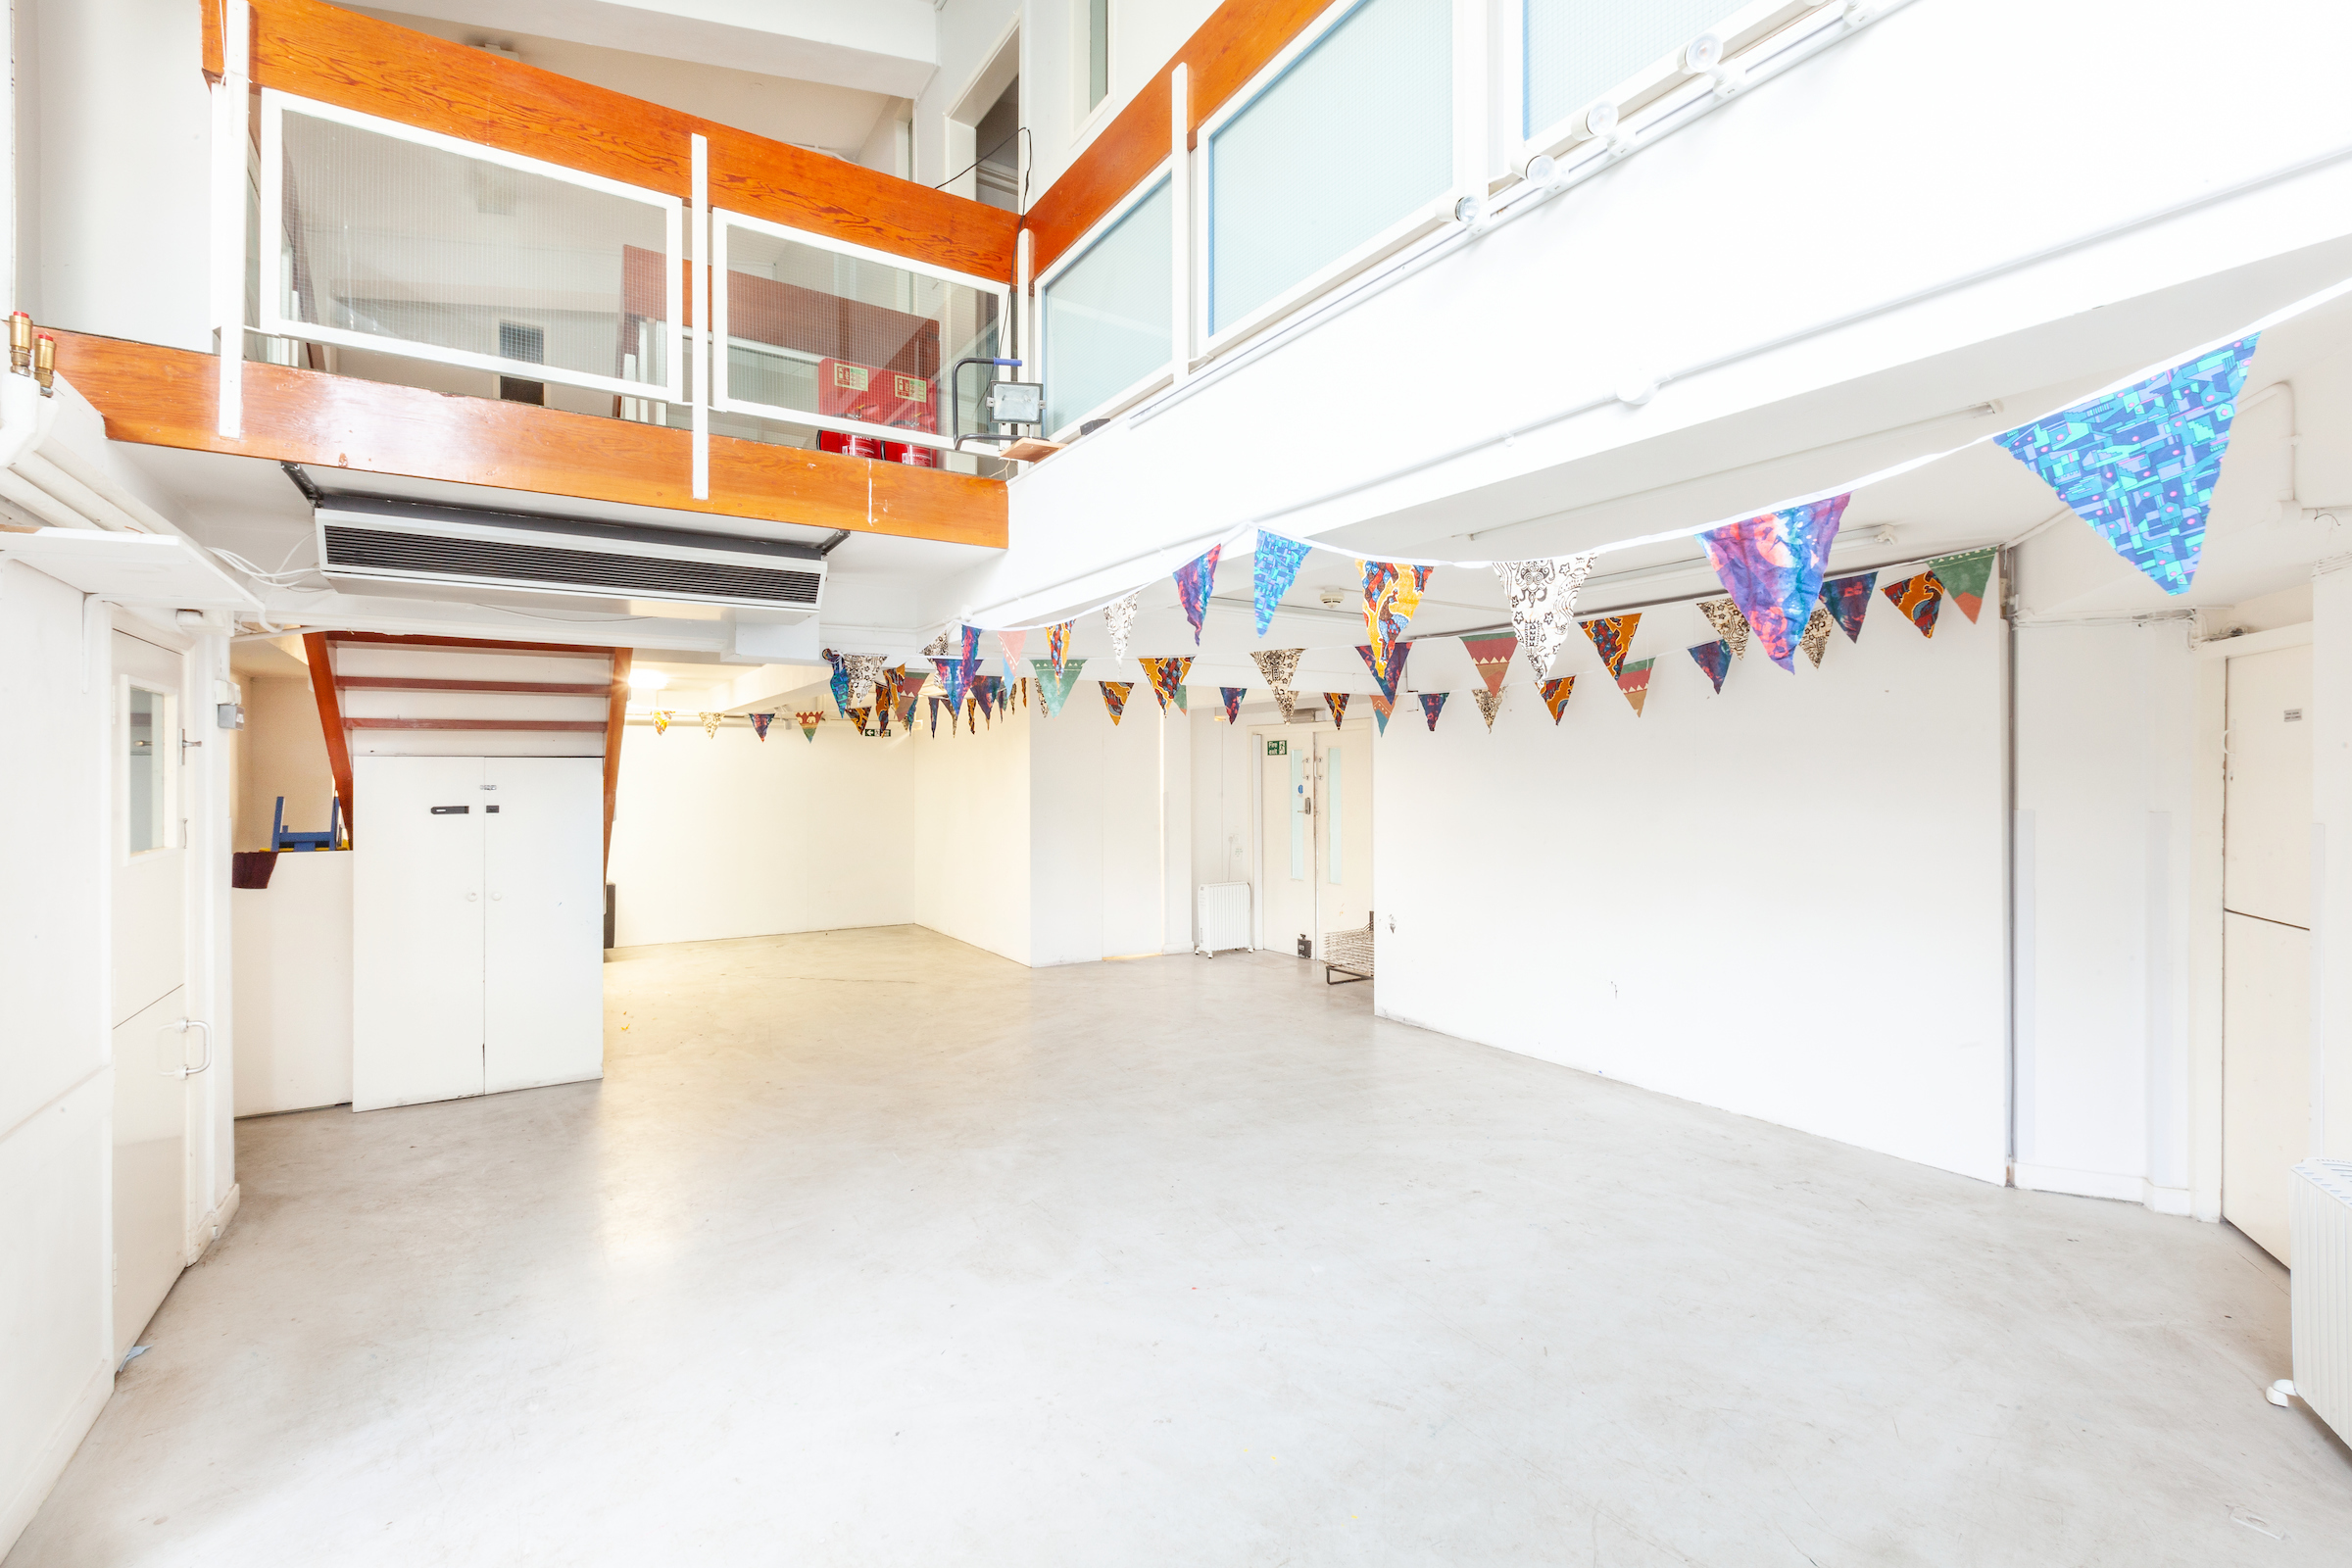 Photograph of a bright indoor space, a converted nursery, bunting hanging from the ceiling